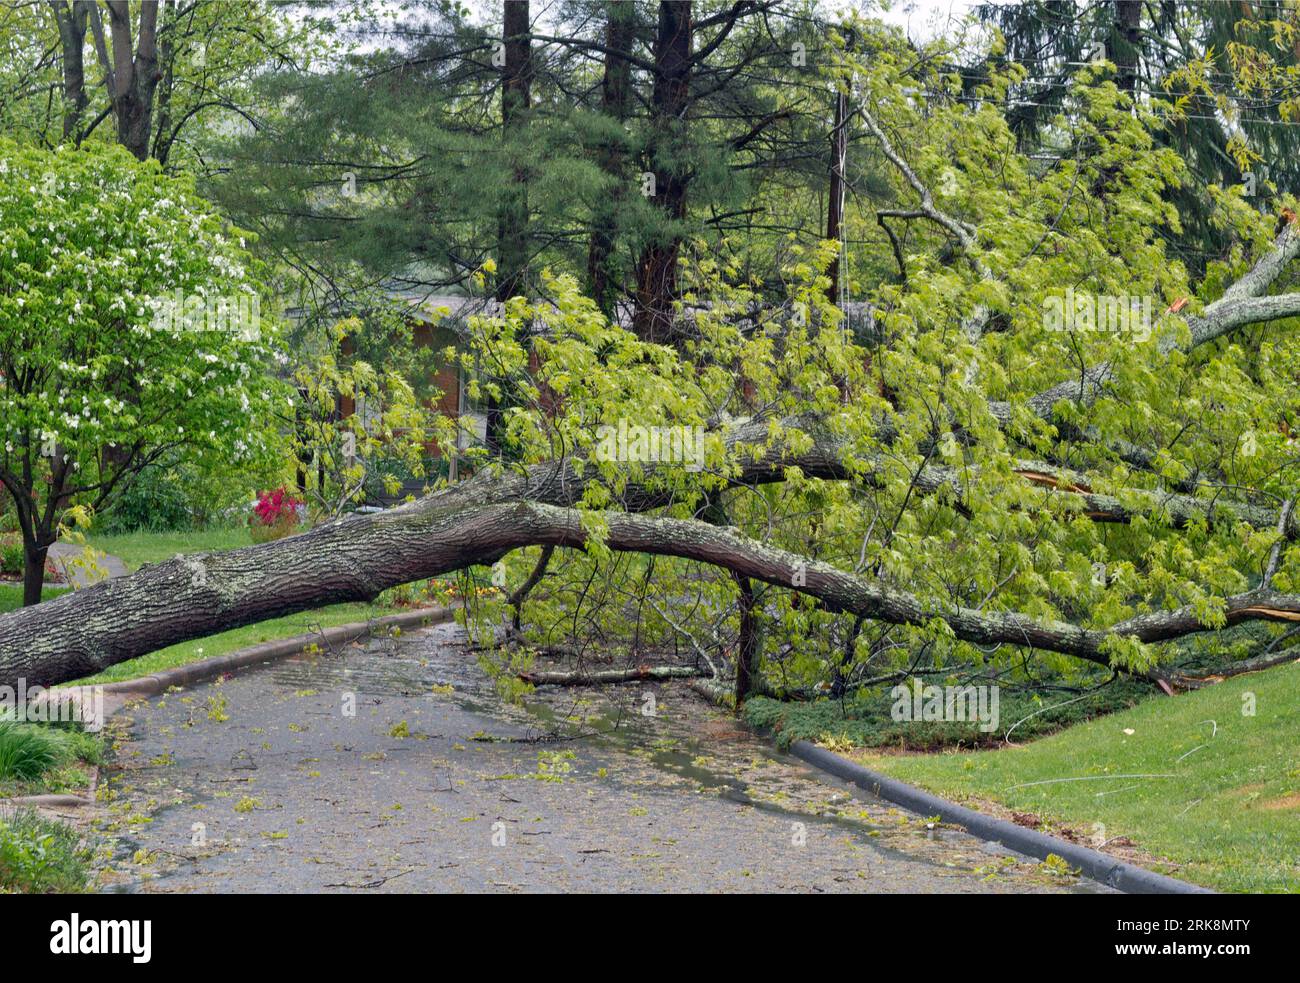 A large tree topples over across a narrw neighborhood road in the rain pulling down utility lines with it Stock Photo